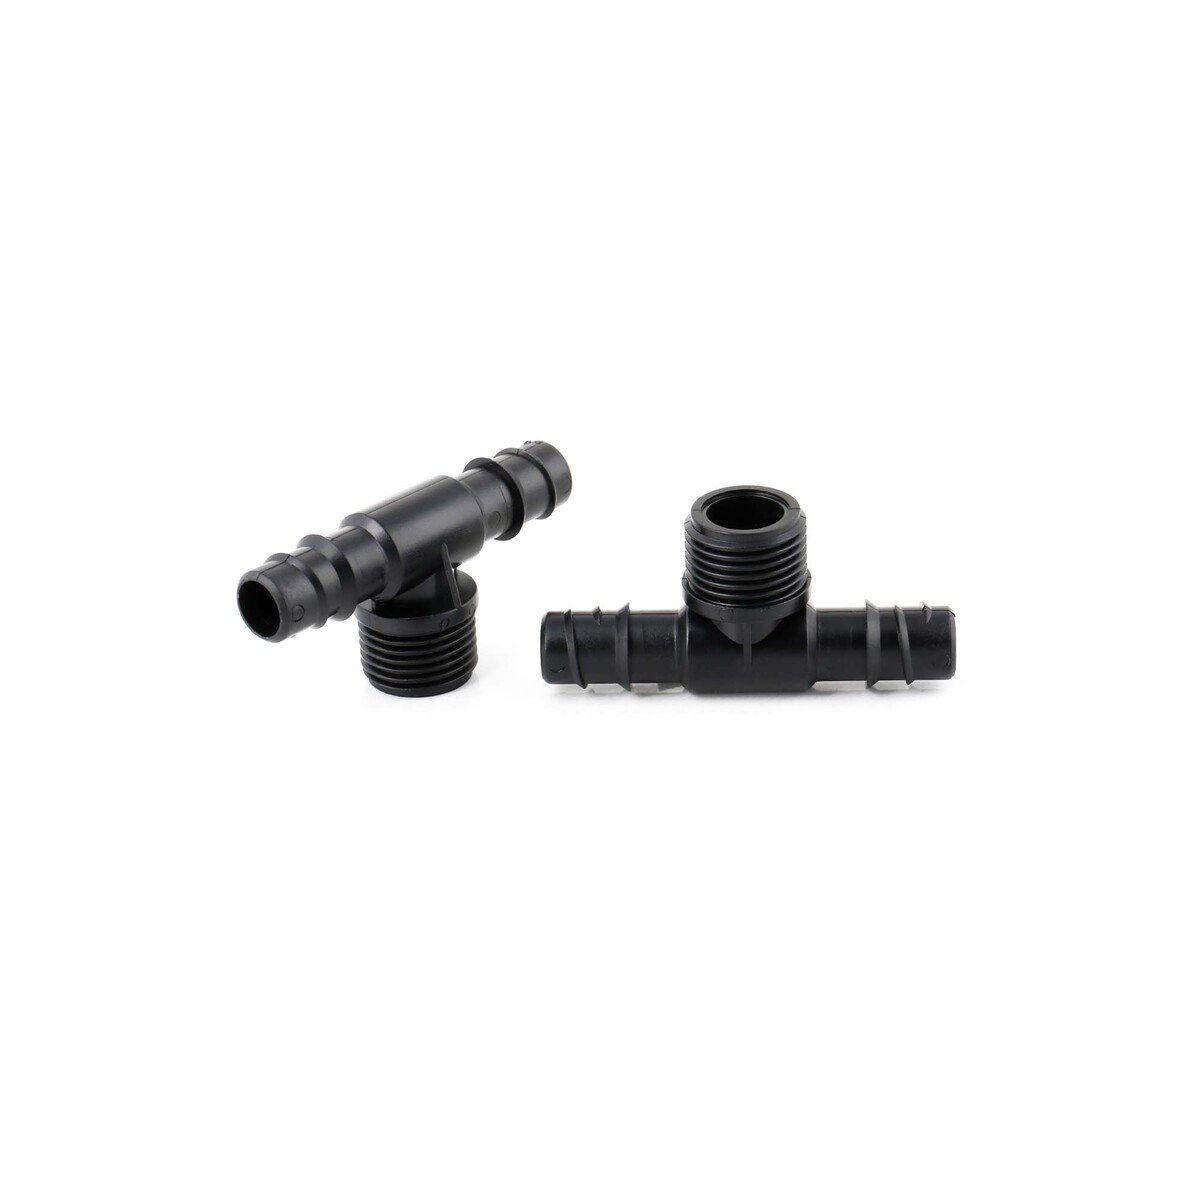 Clbber Threaded 3 Way Connect, Black, 91072